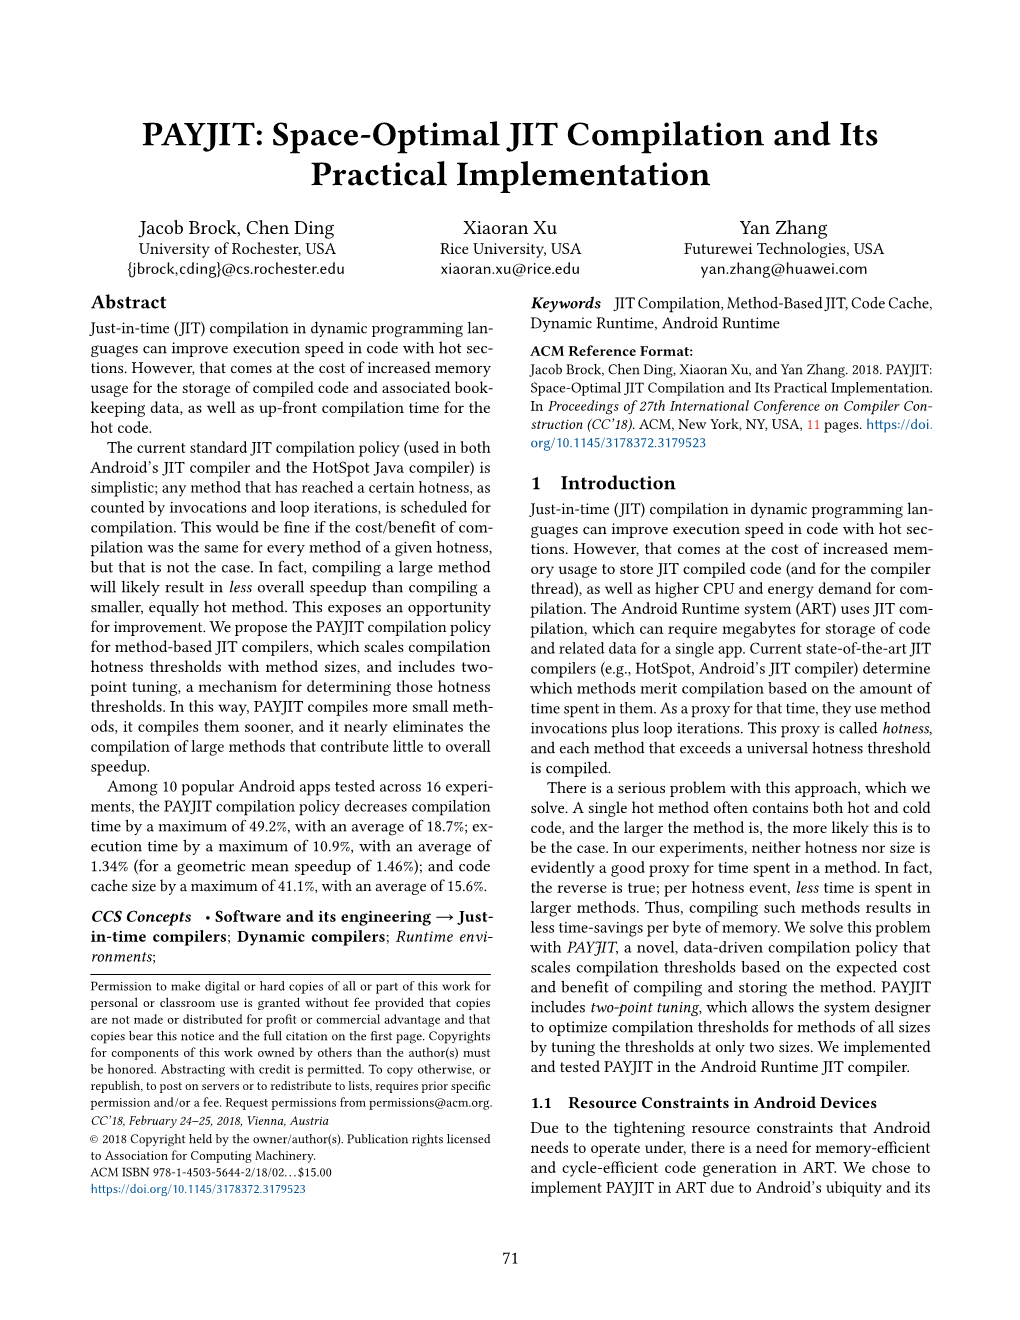 Space-Optimal JIT Compilation and Its Practical Implementation